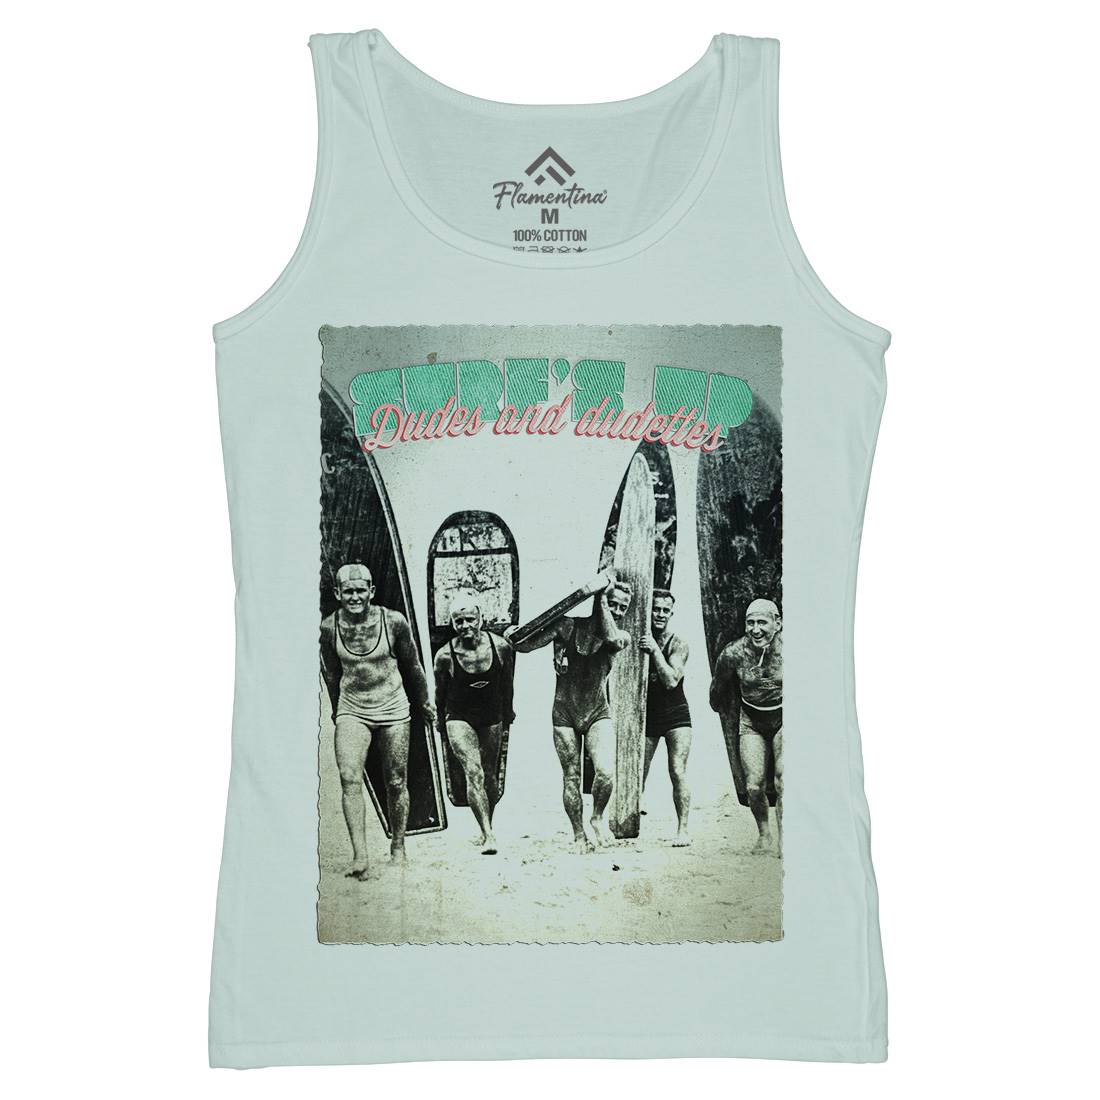 In The Usa Womens Organic Tank Top Vest Surf A917